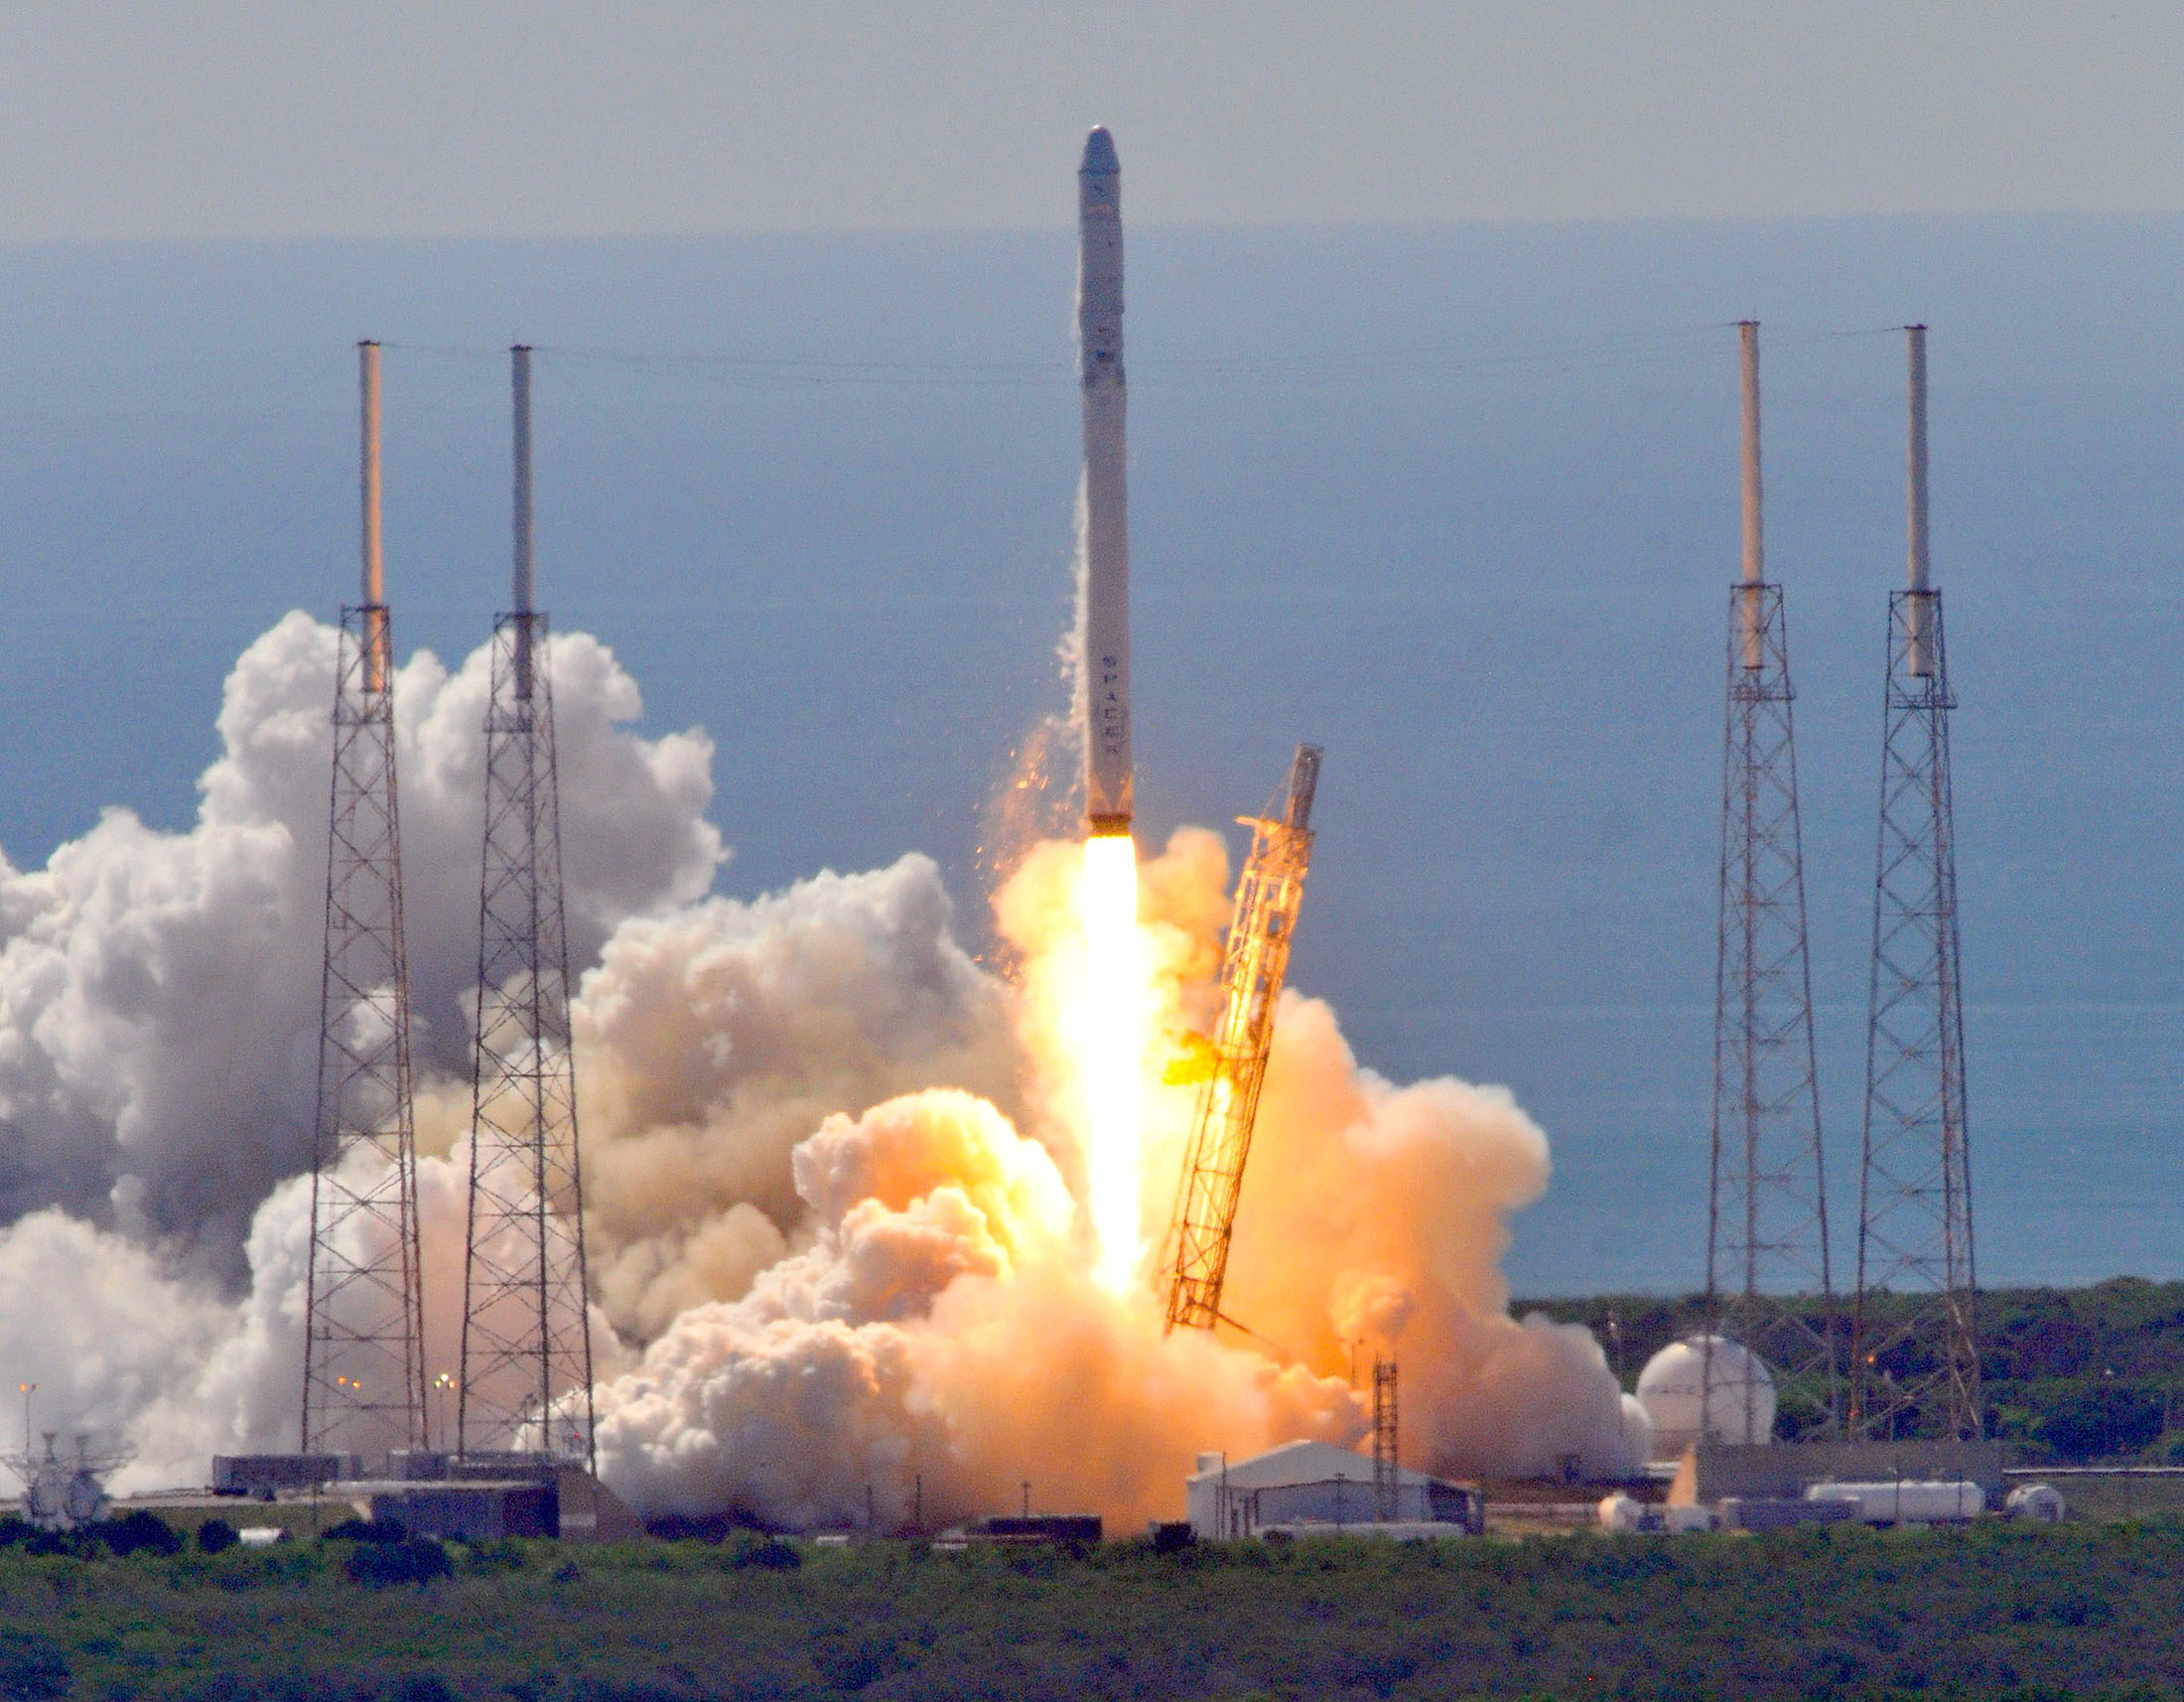 Space X's Falcon 9 rocket lifts off from space launch complex 40 at Cape Canaveral, Florida, before exploding, on June 28, 2015.
